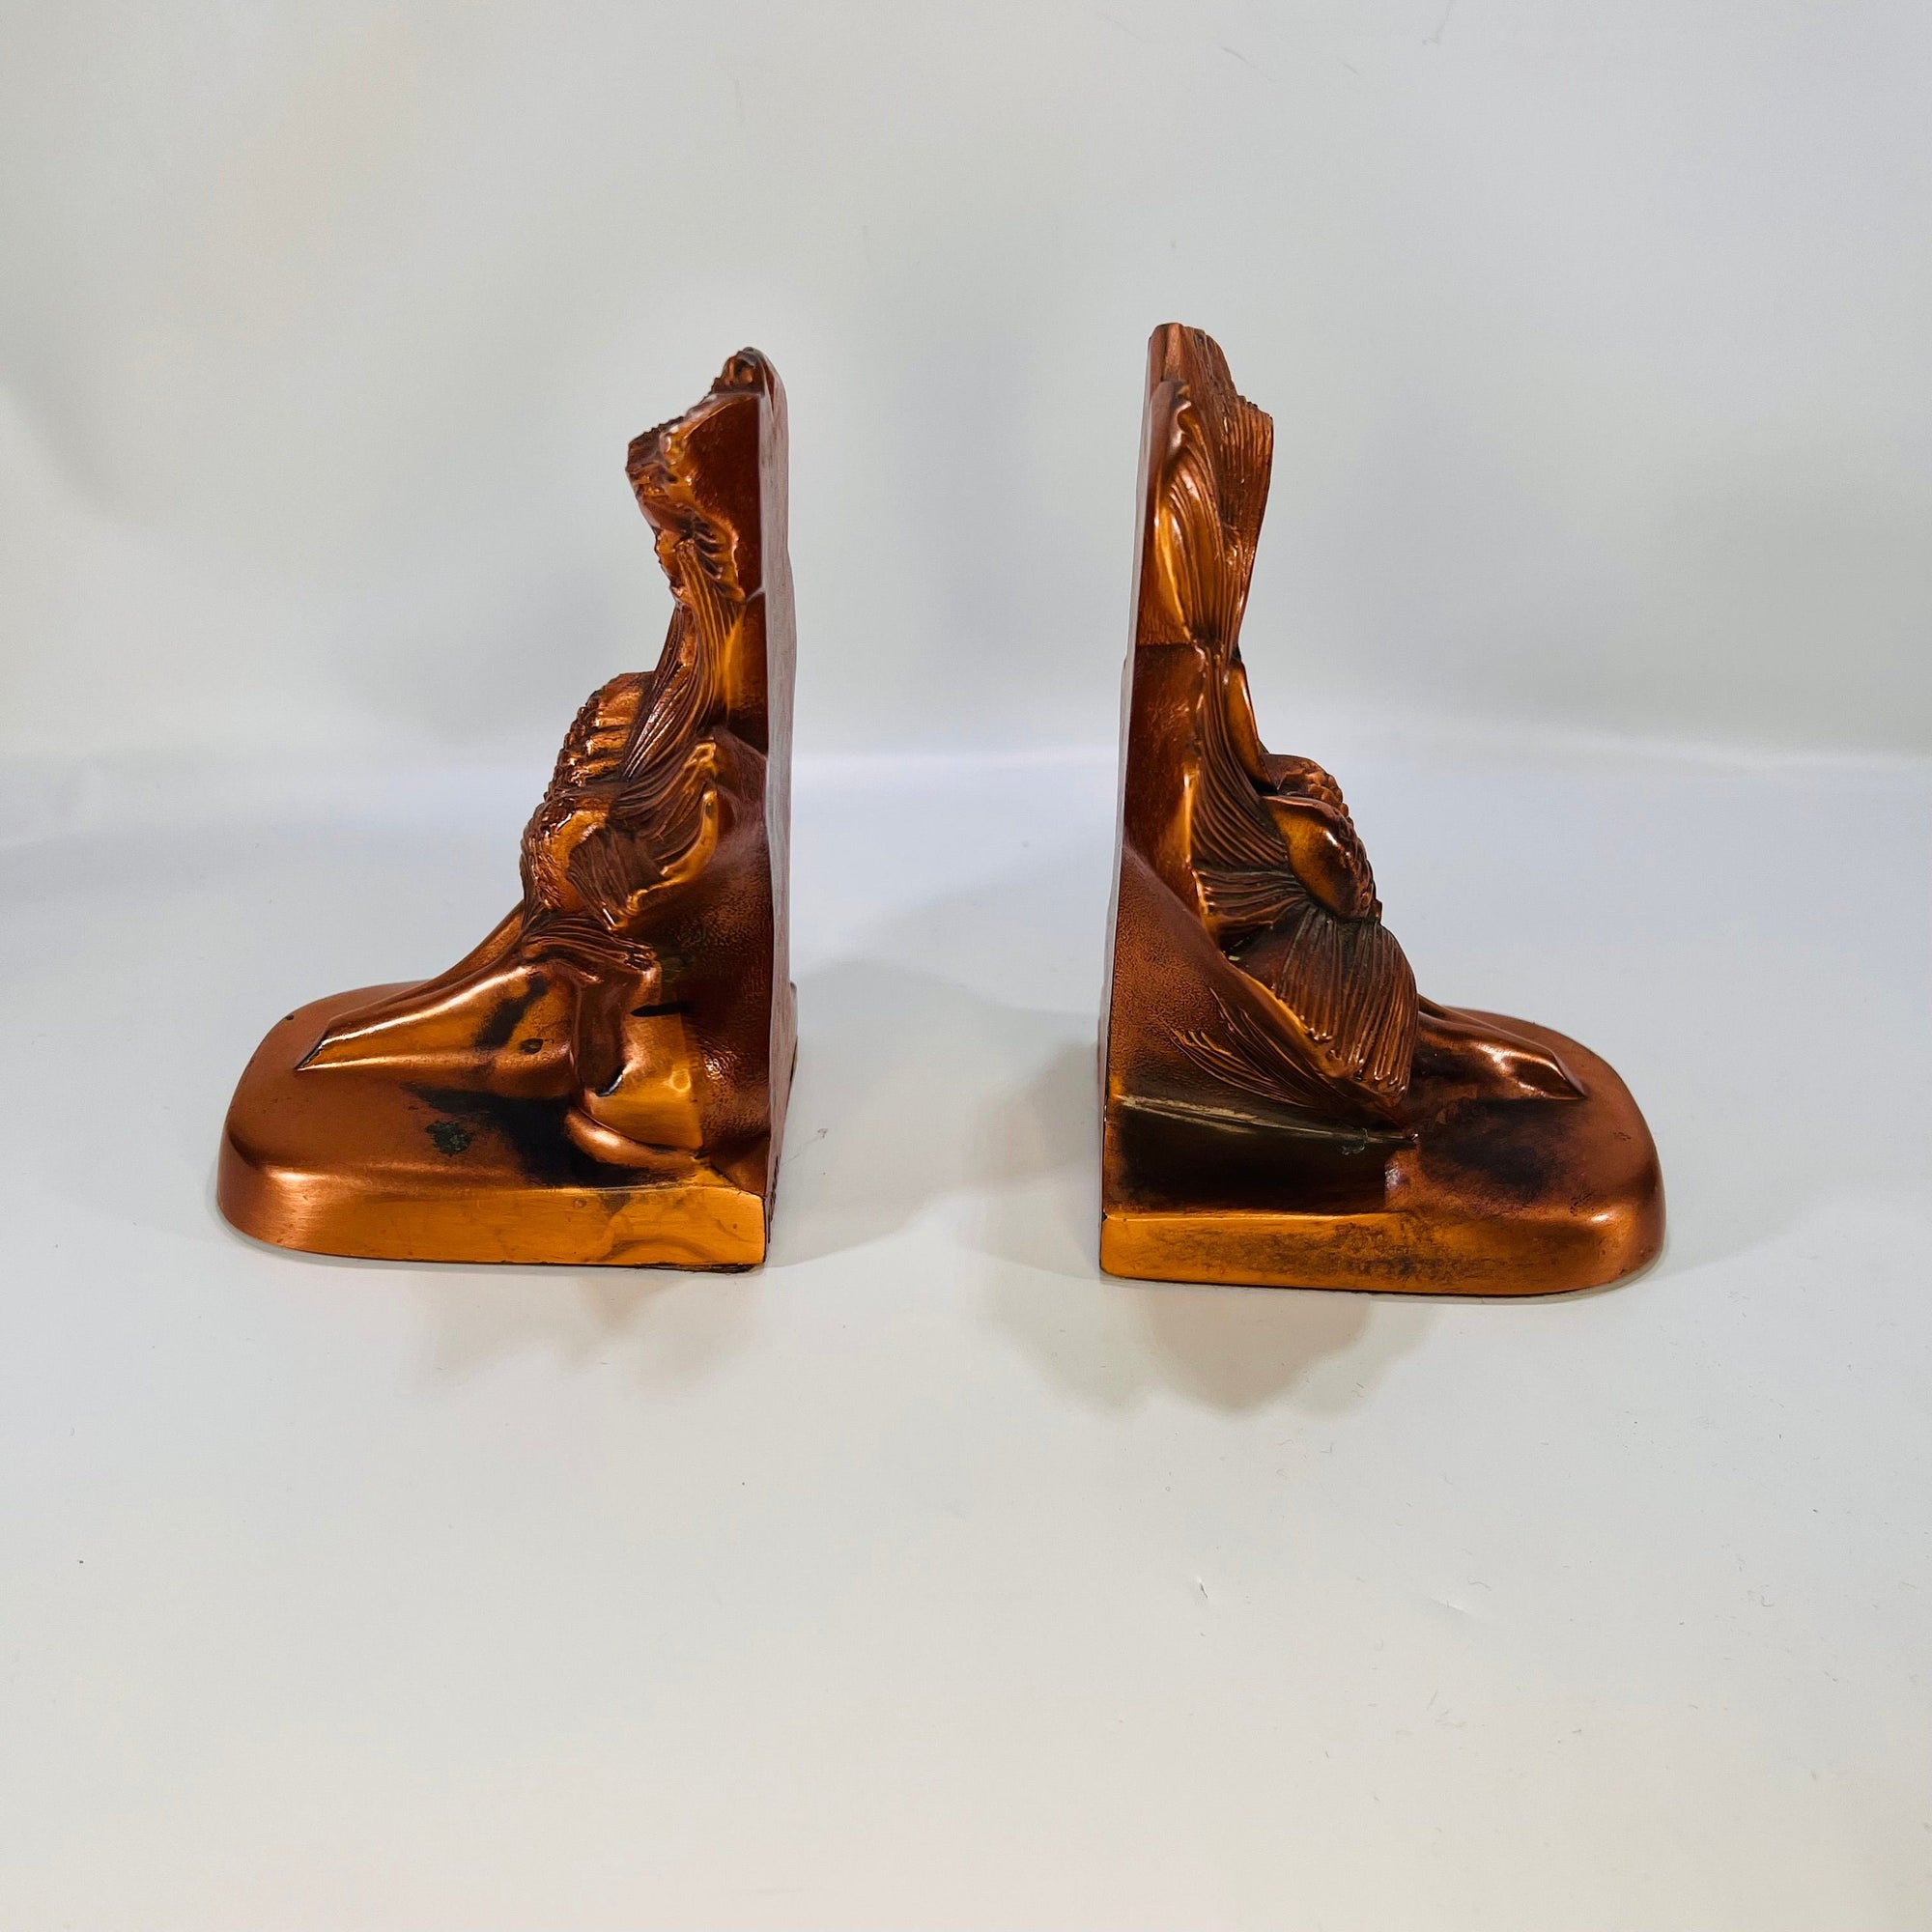 Pair of Pine Cone on Tree Branch Bookends Vintage Stamped PMC 86